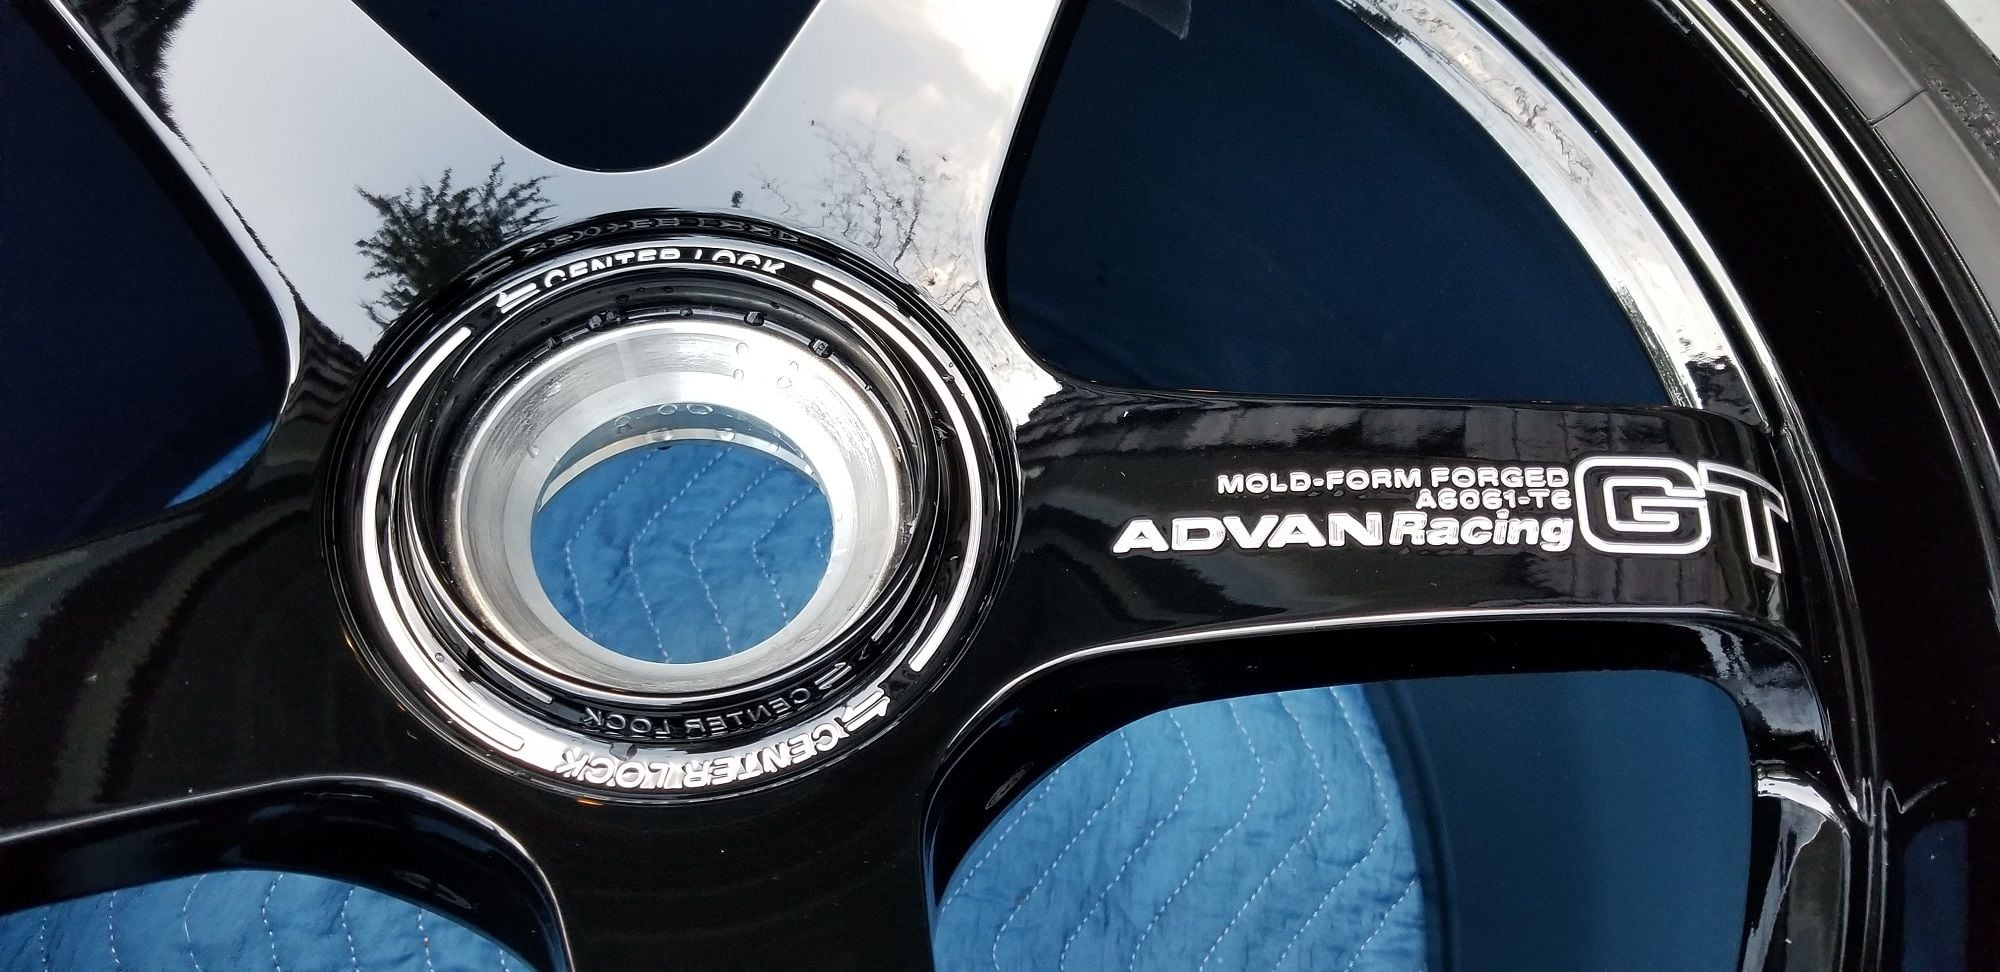 Wheels and Tires/Axles - Advan GT Center Locks Wheels with Cup2 N1 for 991 GTS/GT3. Used Less than 3 months. - Used - 2014 to 2018 Porsche 911 - Oakland, CA 94611, United States